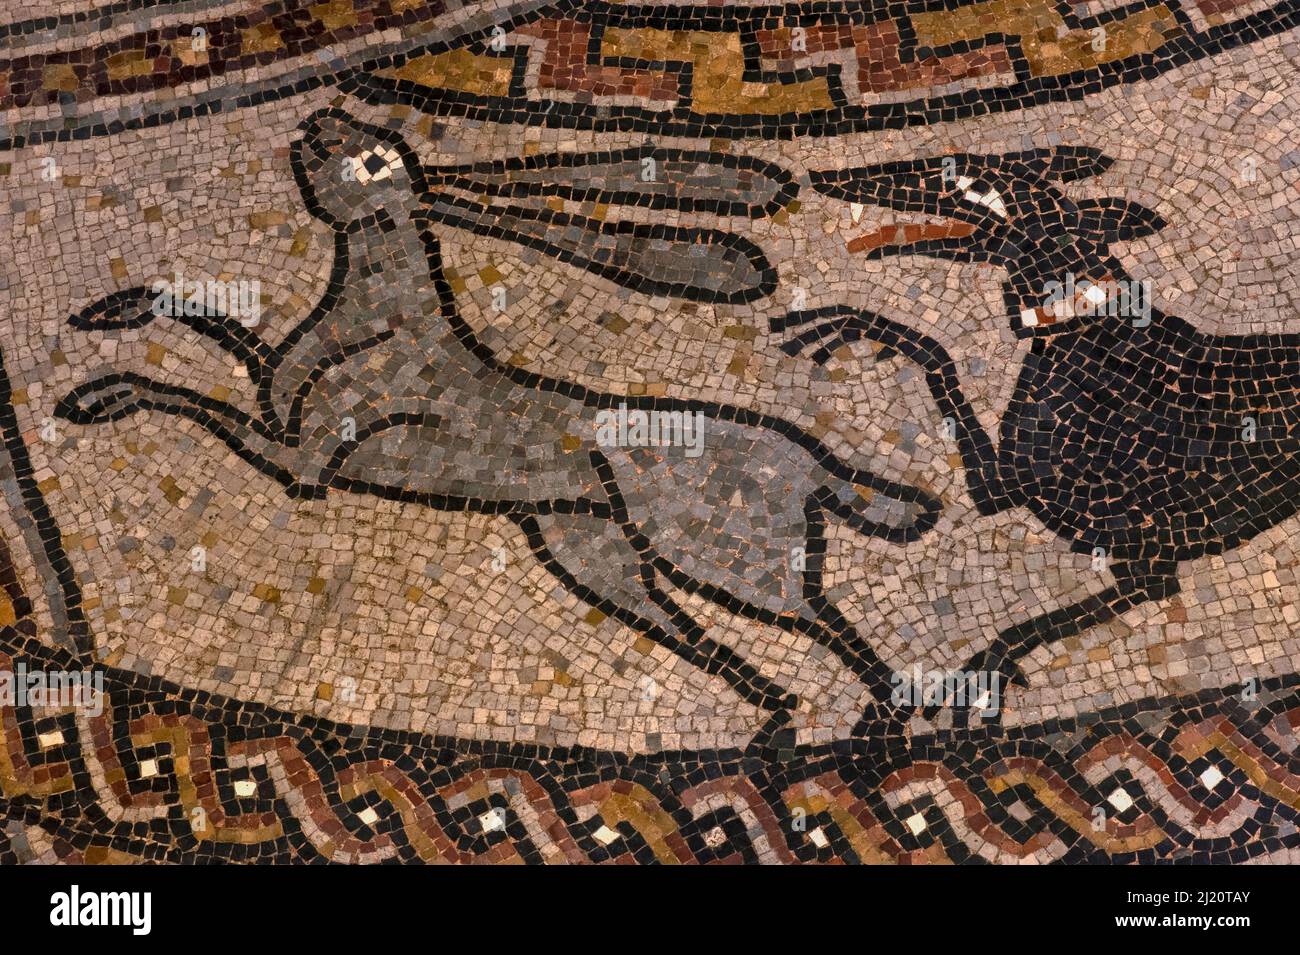 Black dog chases leaping grey hare.  Detail of medieval mosaic in restored late-1000s or early 1100s pavement in former Benedictine abbey church at Sorde l'Abbaye, Landes, Nouvelle-Aquitaine, France. Stock Photo